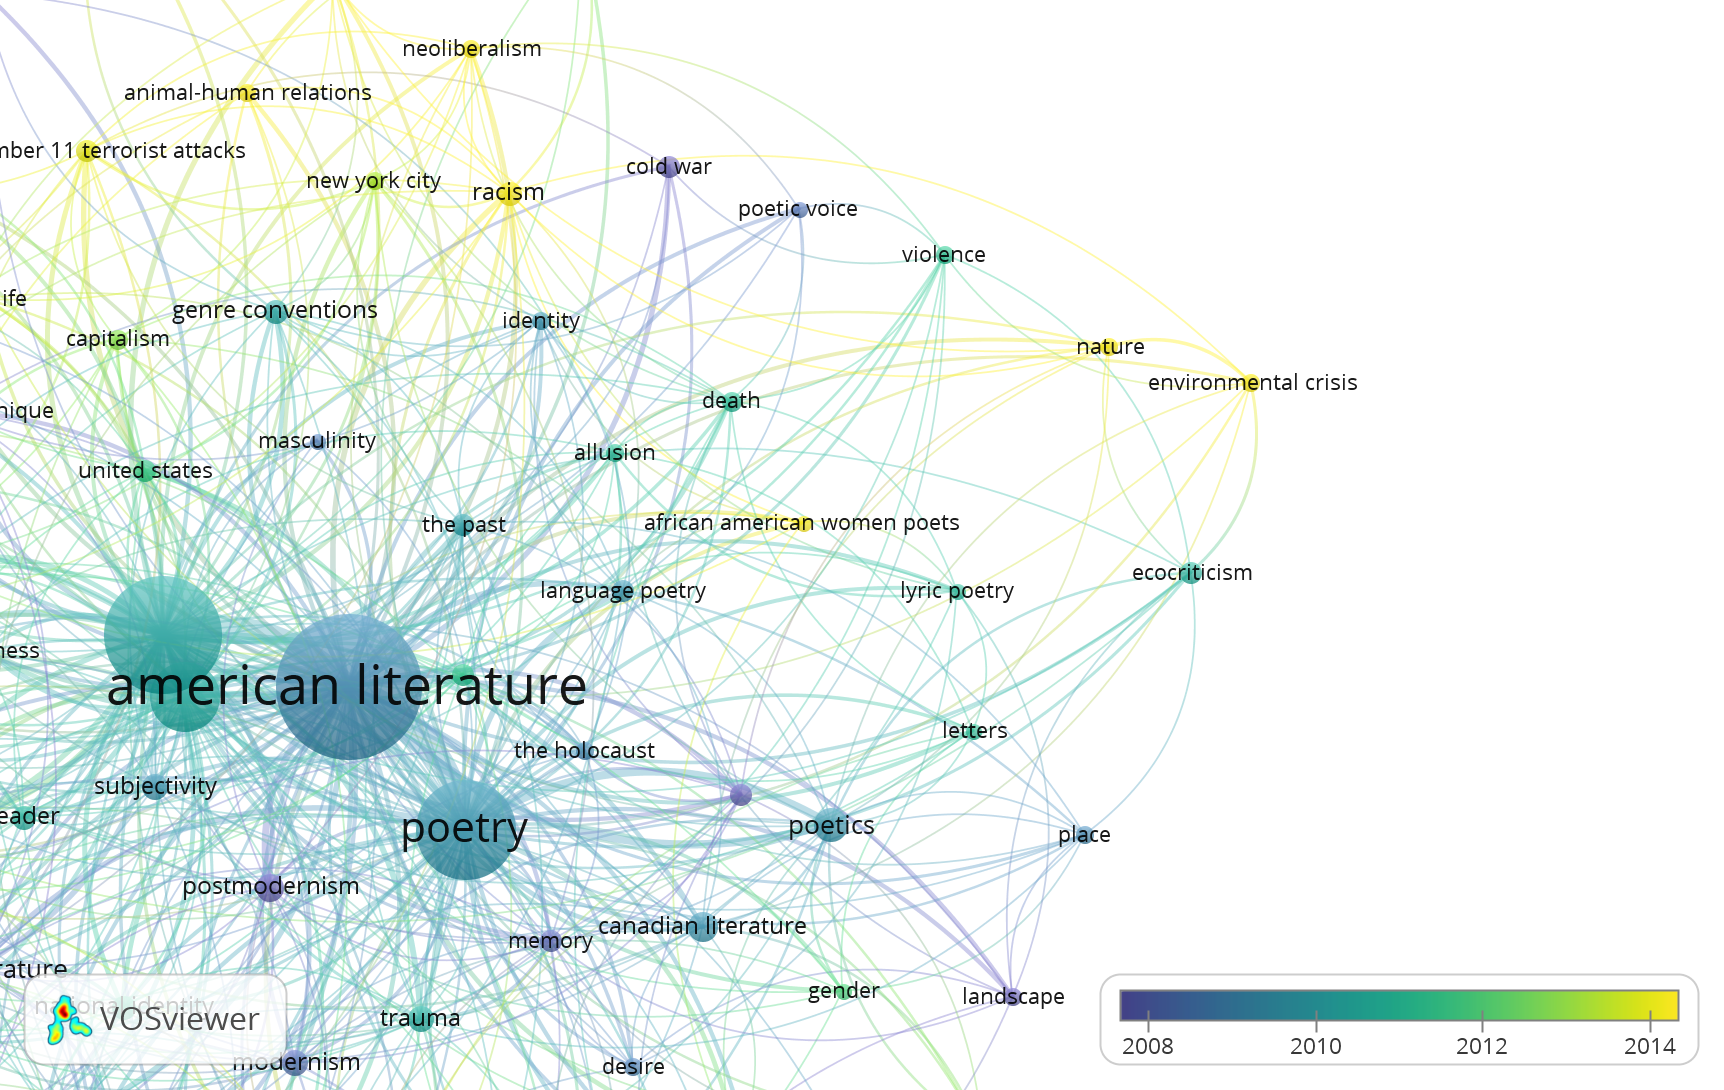 A screenshot of the network diagram from figure 2, zoomed in on the community around "american literature"